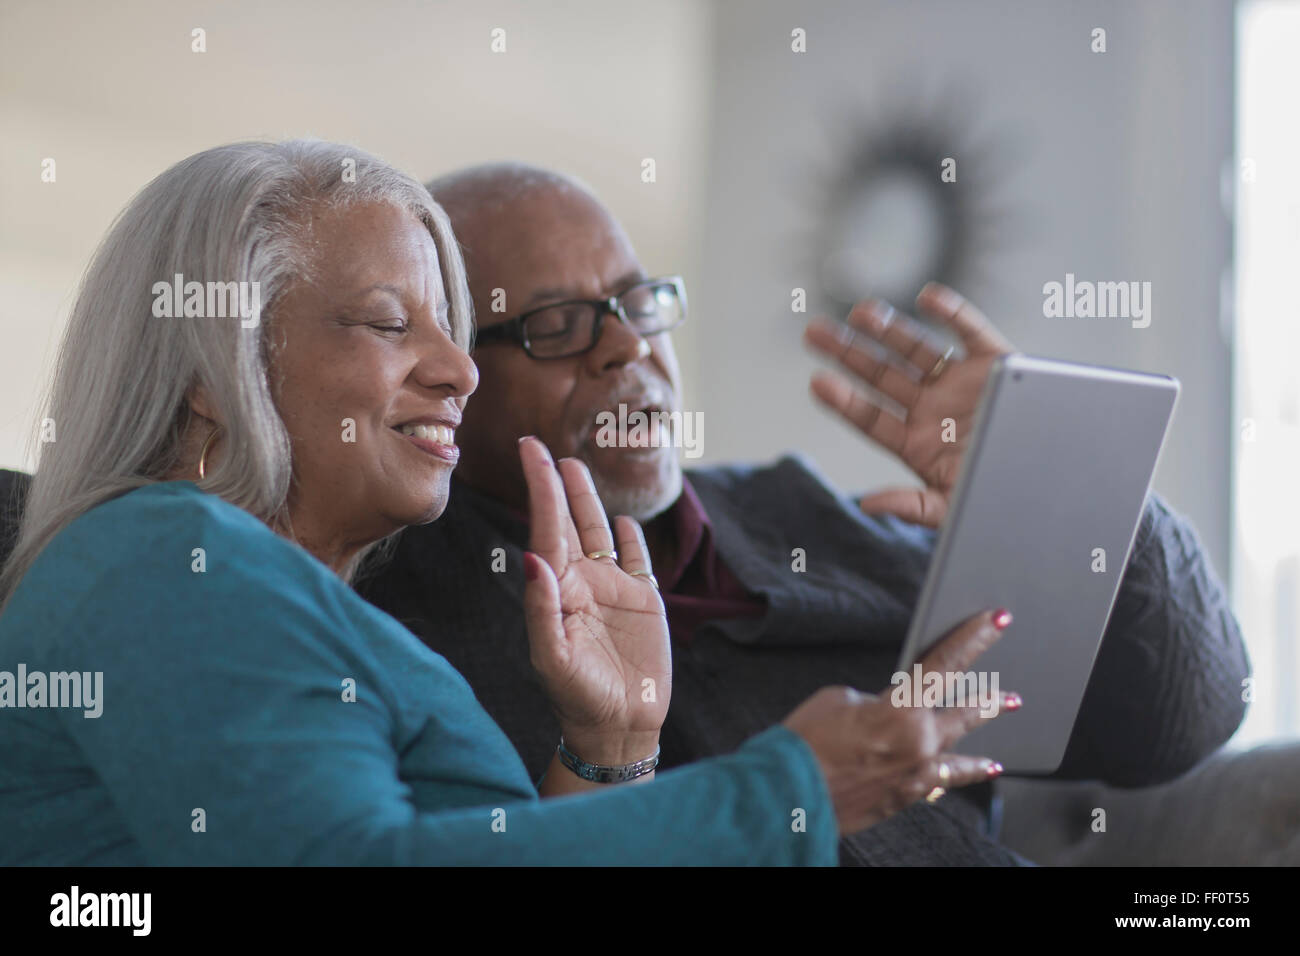 Older couple video chatting with digital tablet Stock Photo